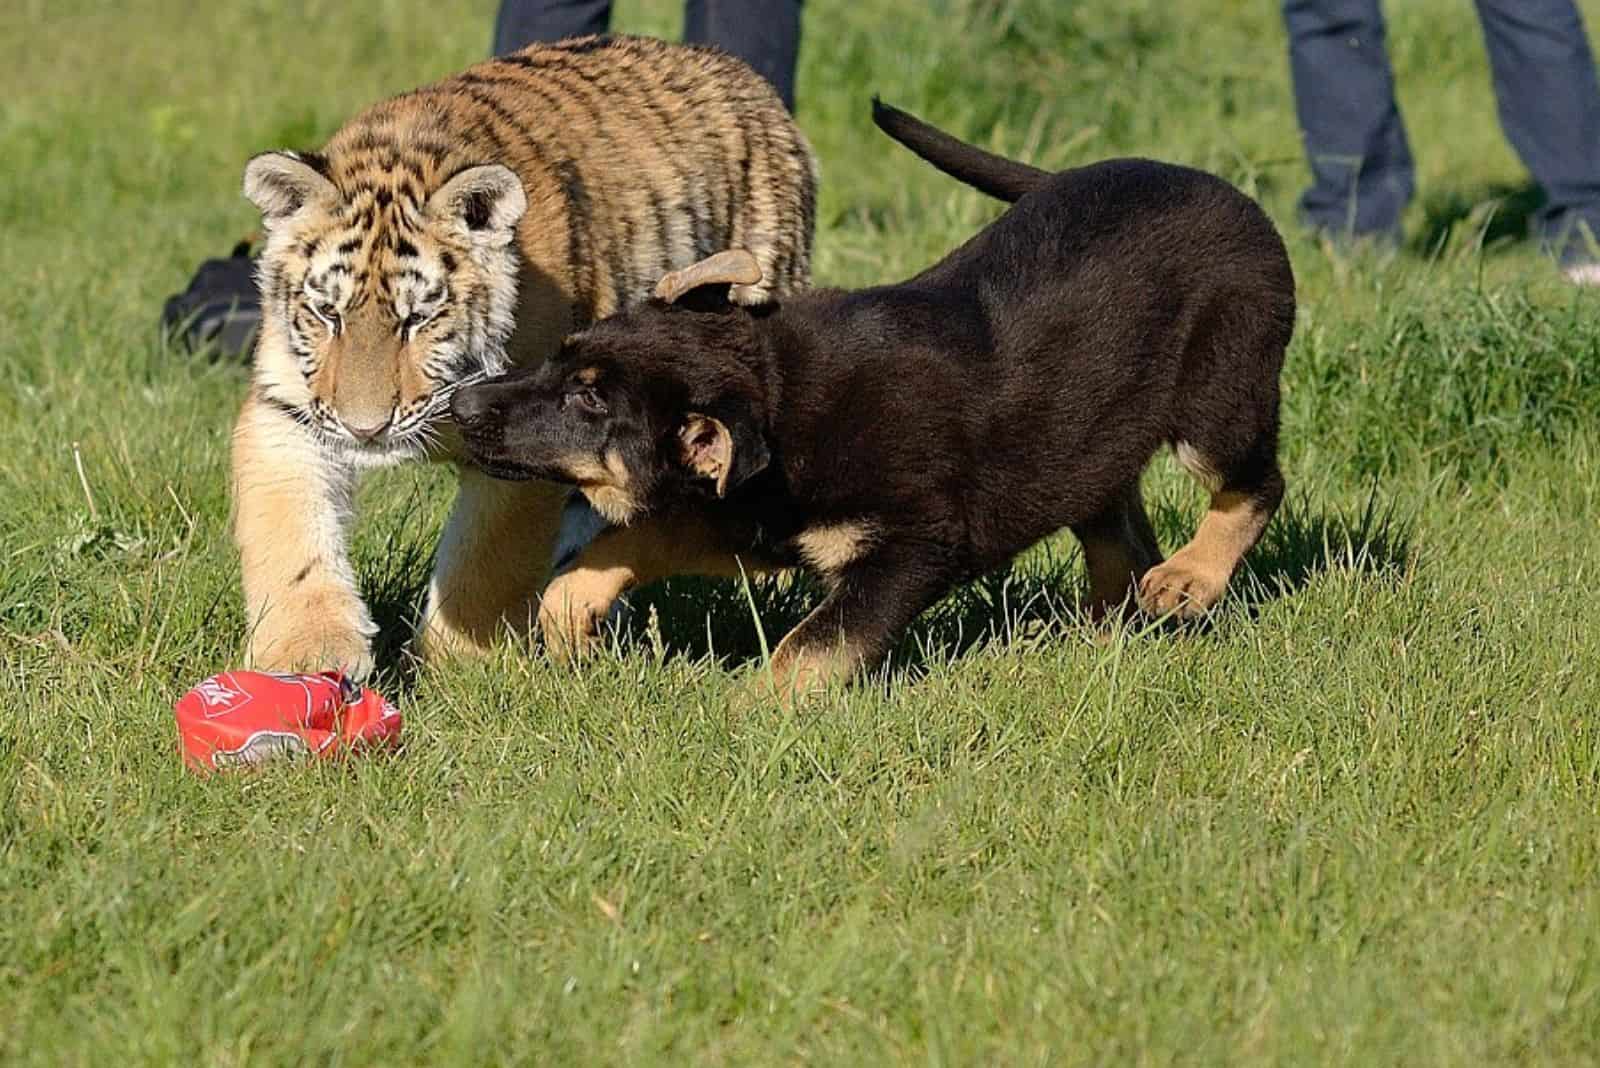 tiger playing with a german shepherd dog on the lawn